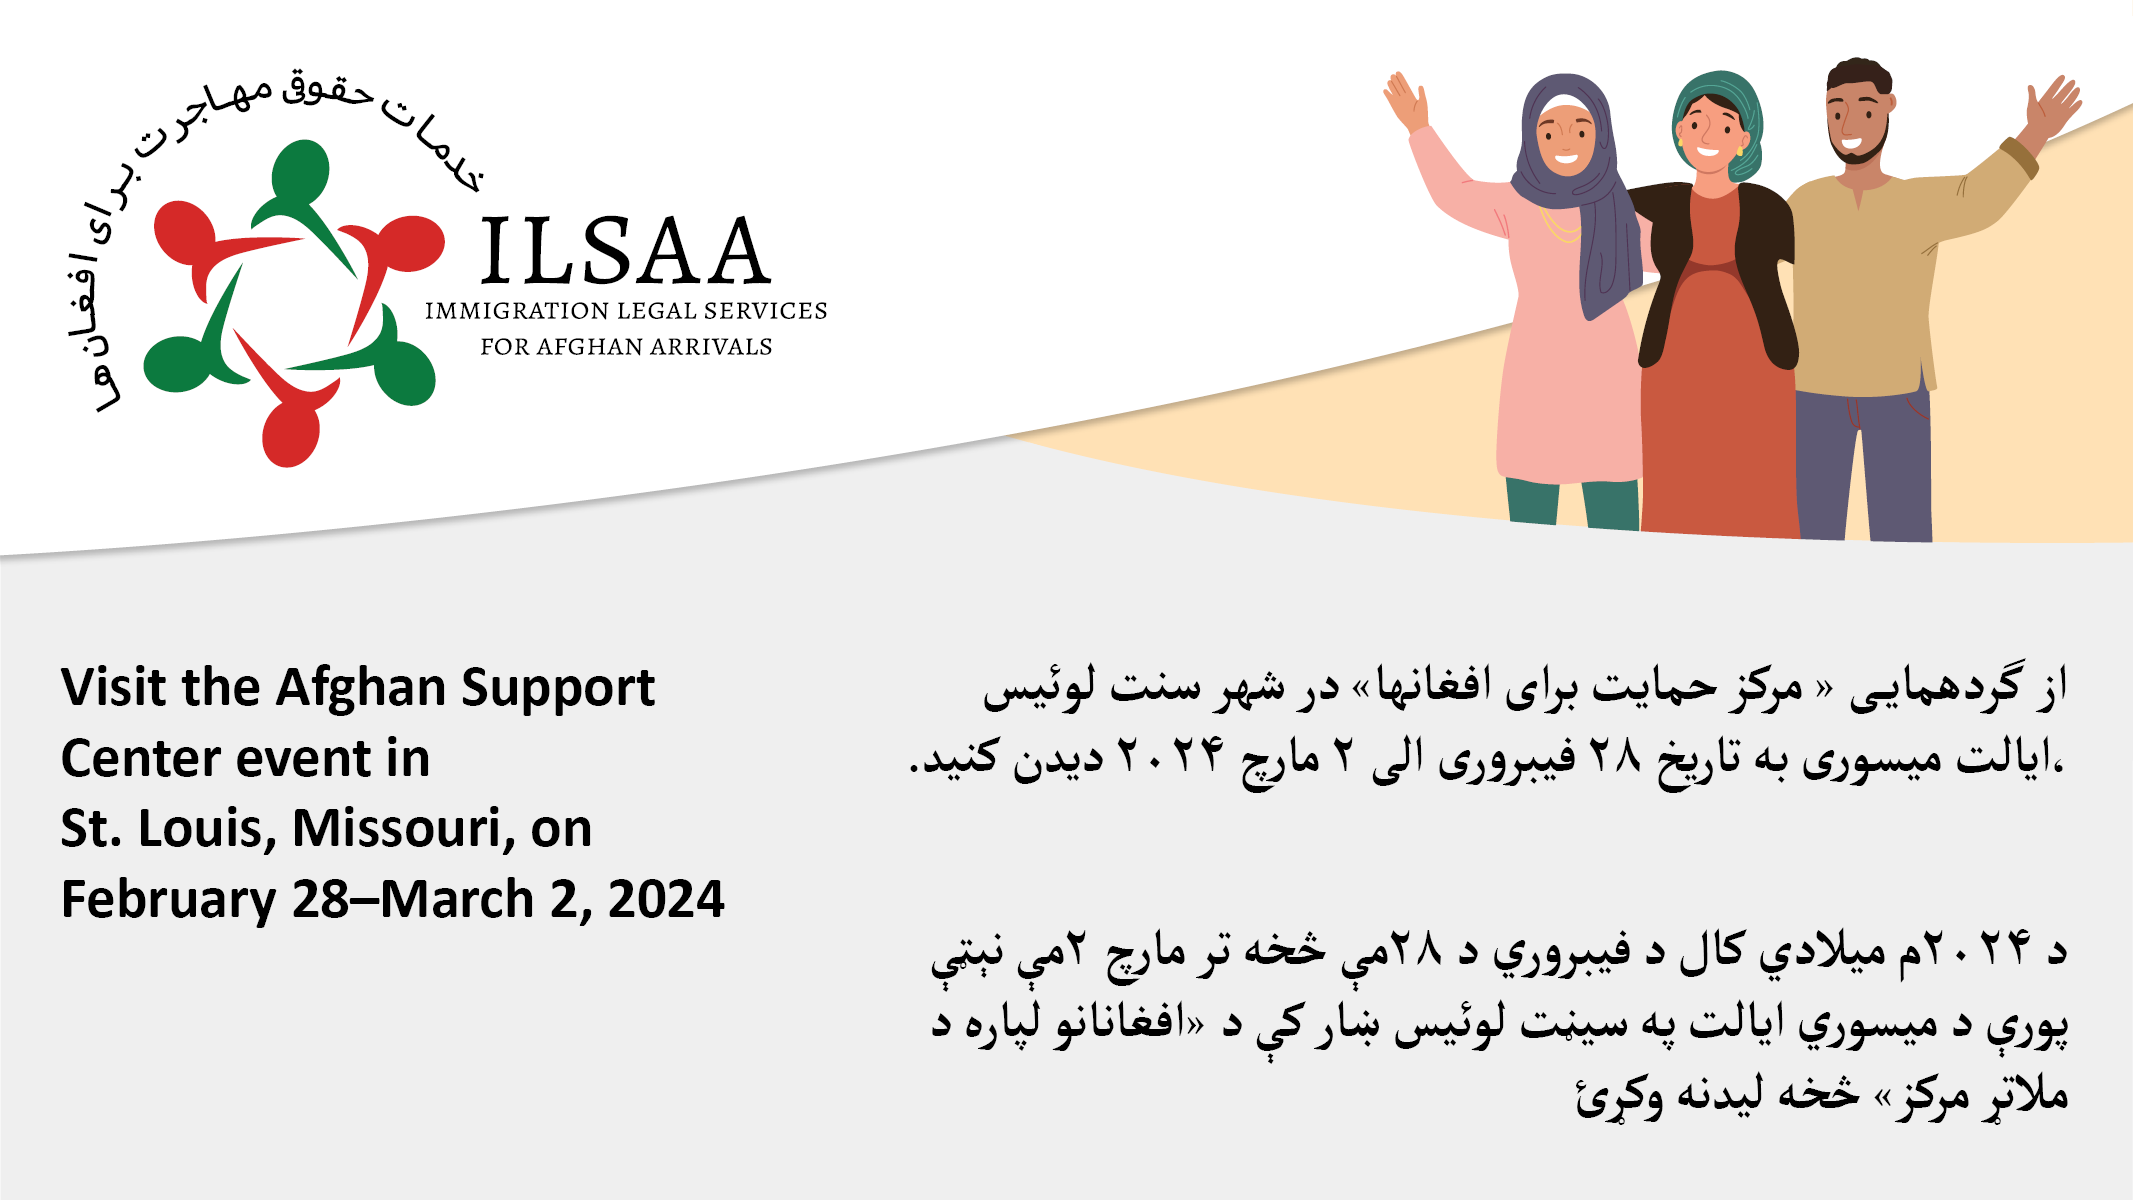 Visit the Afghan Support Center event in St. Louis, Missouri, on February 28–March 2, 2024